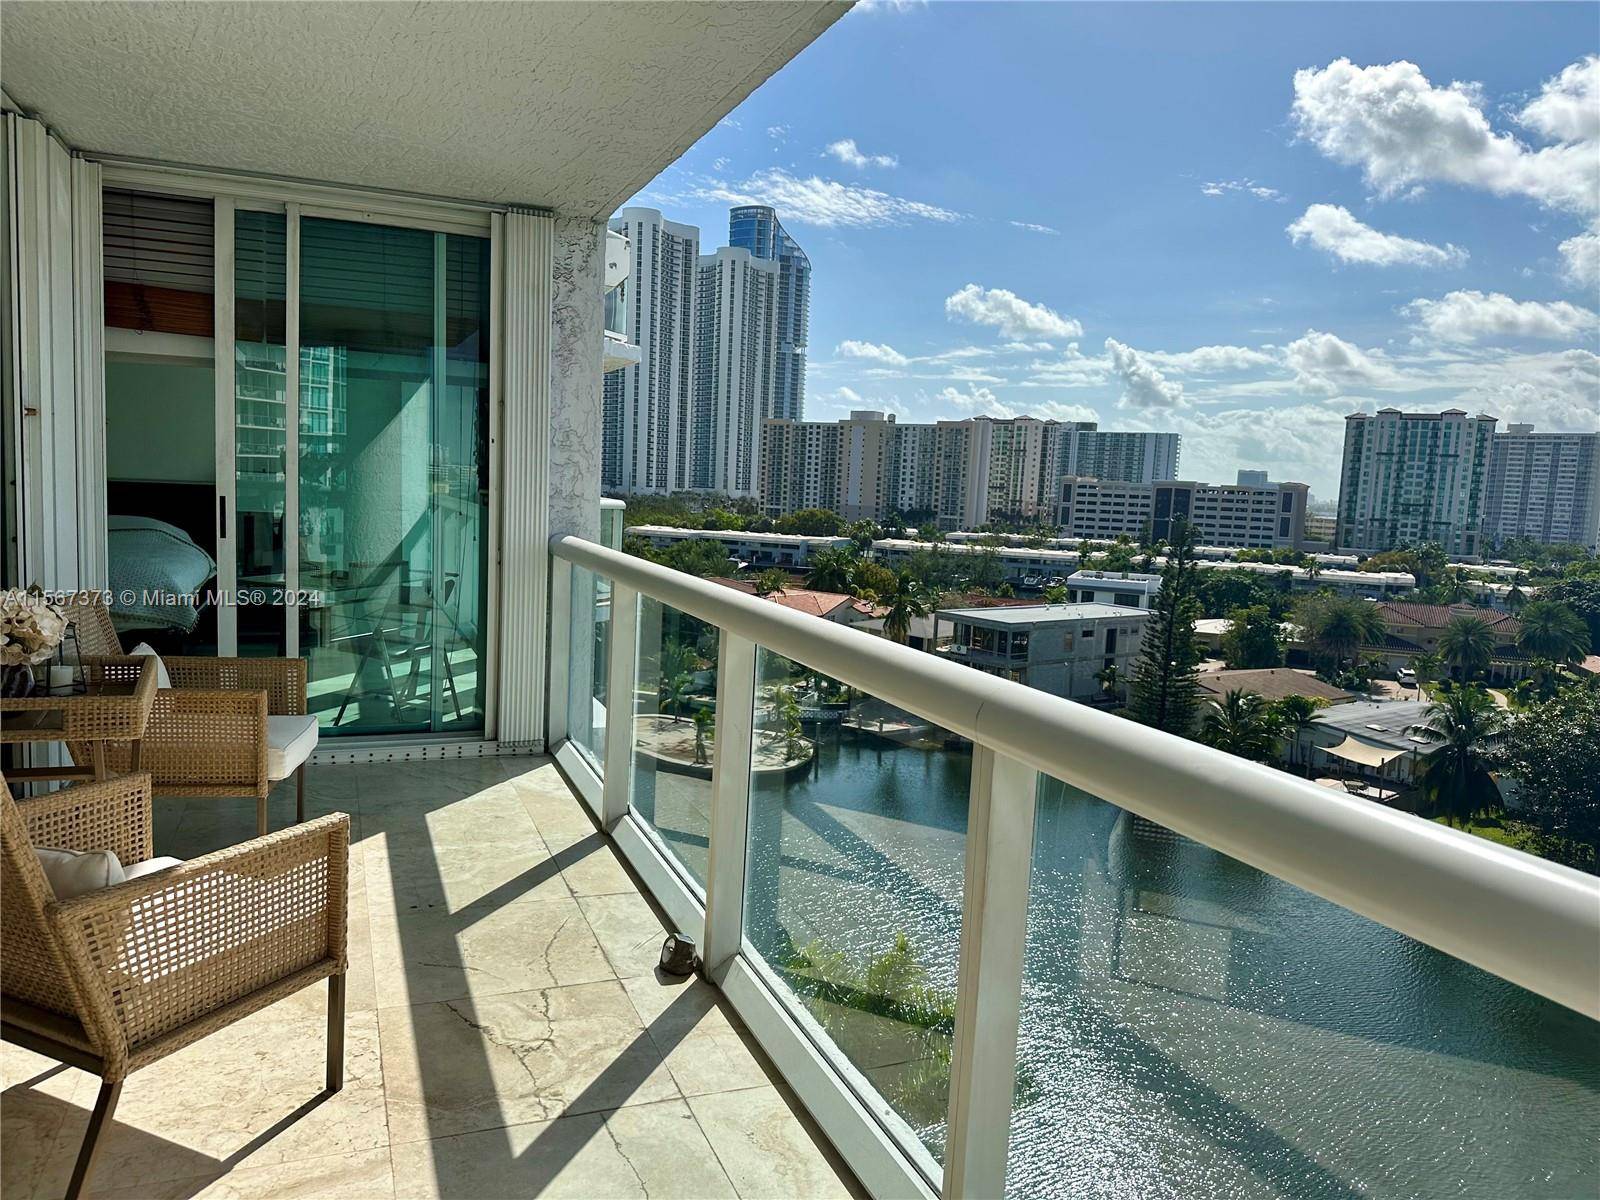 Spacious 2 Bedrooms, 2 Bathrooms DEN with stunning view of the Intracoastal and just across the street from the beach awaits you.